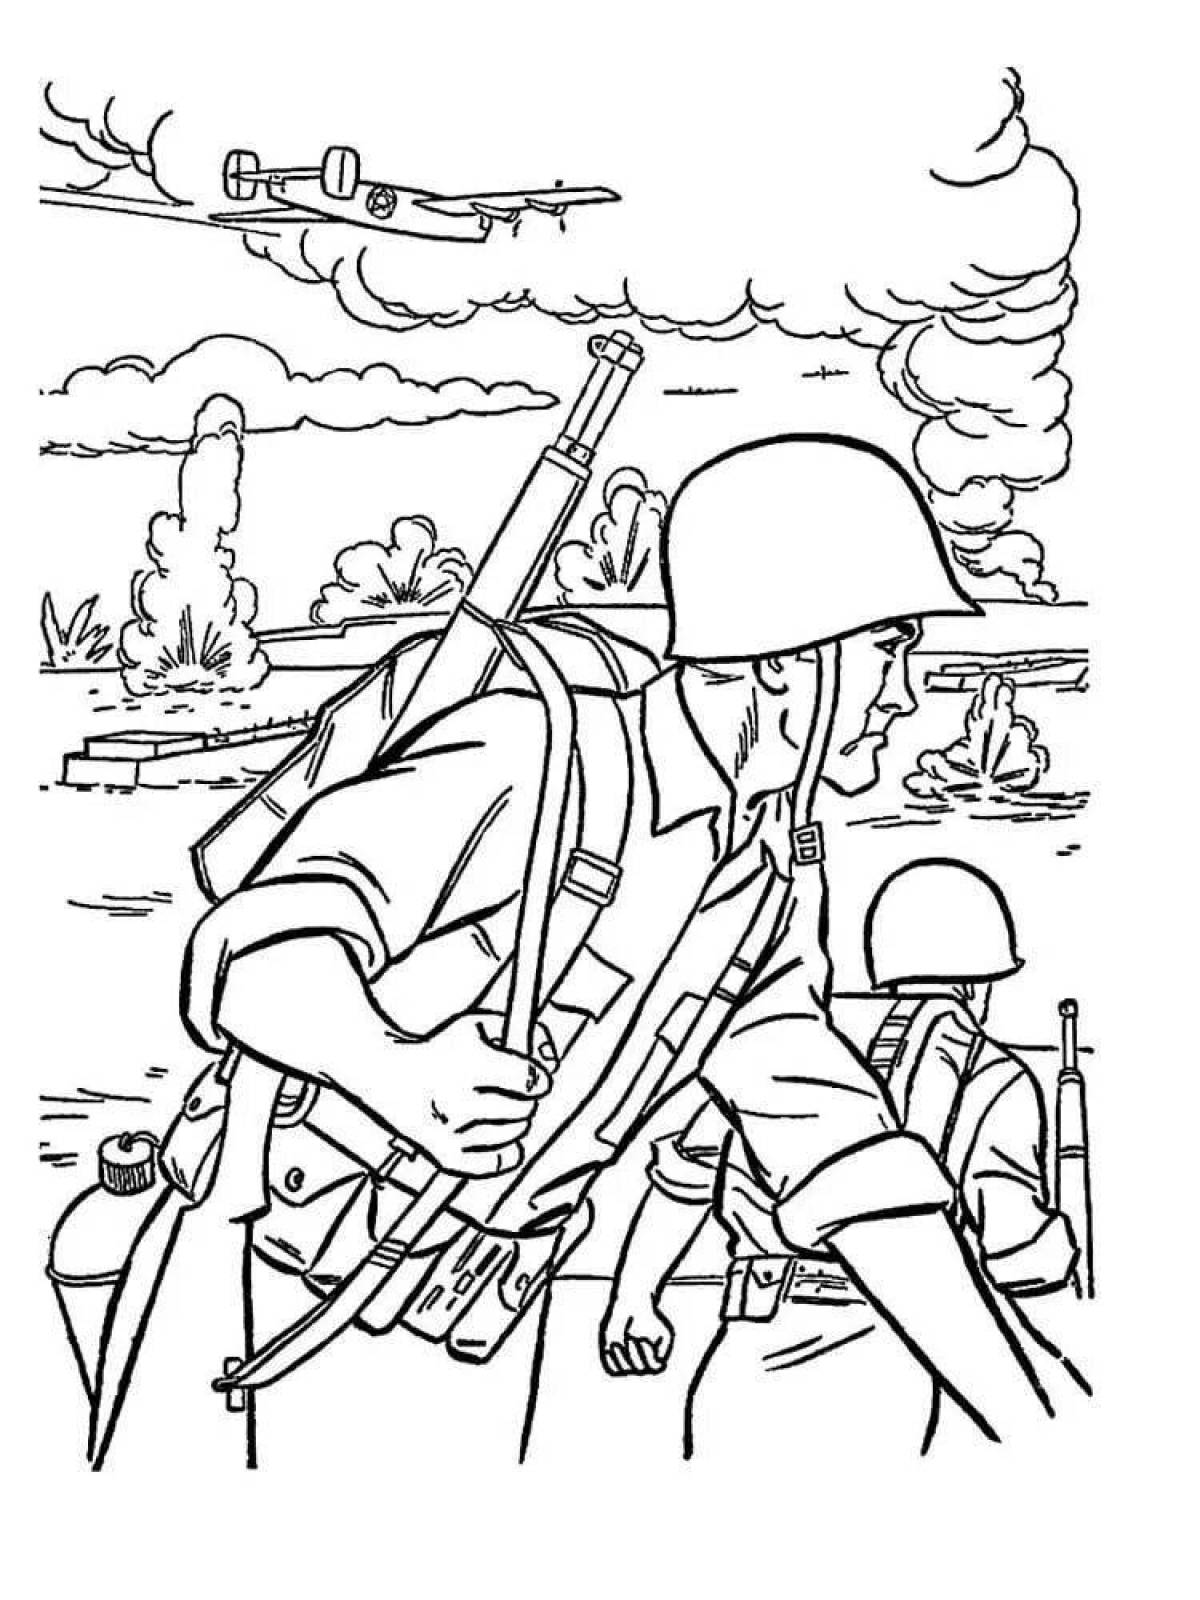 Famous coloring of the day of the battle of Stalingrad